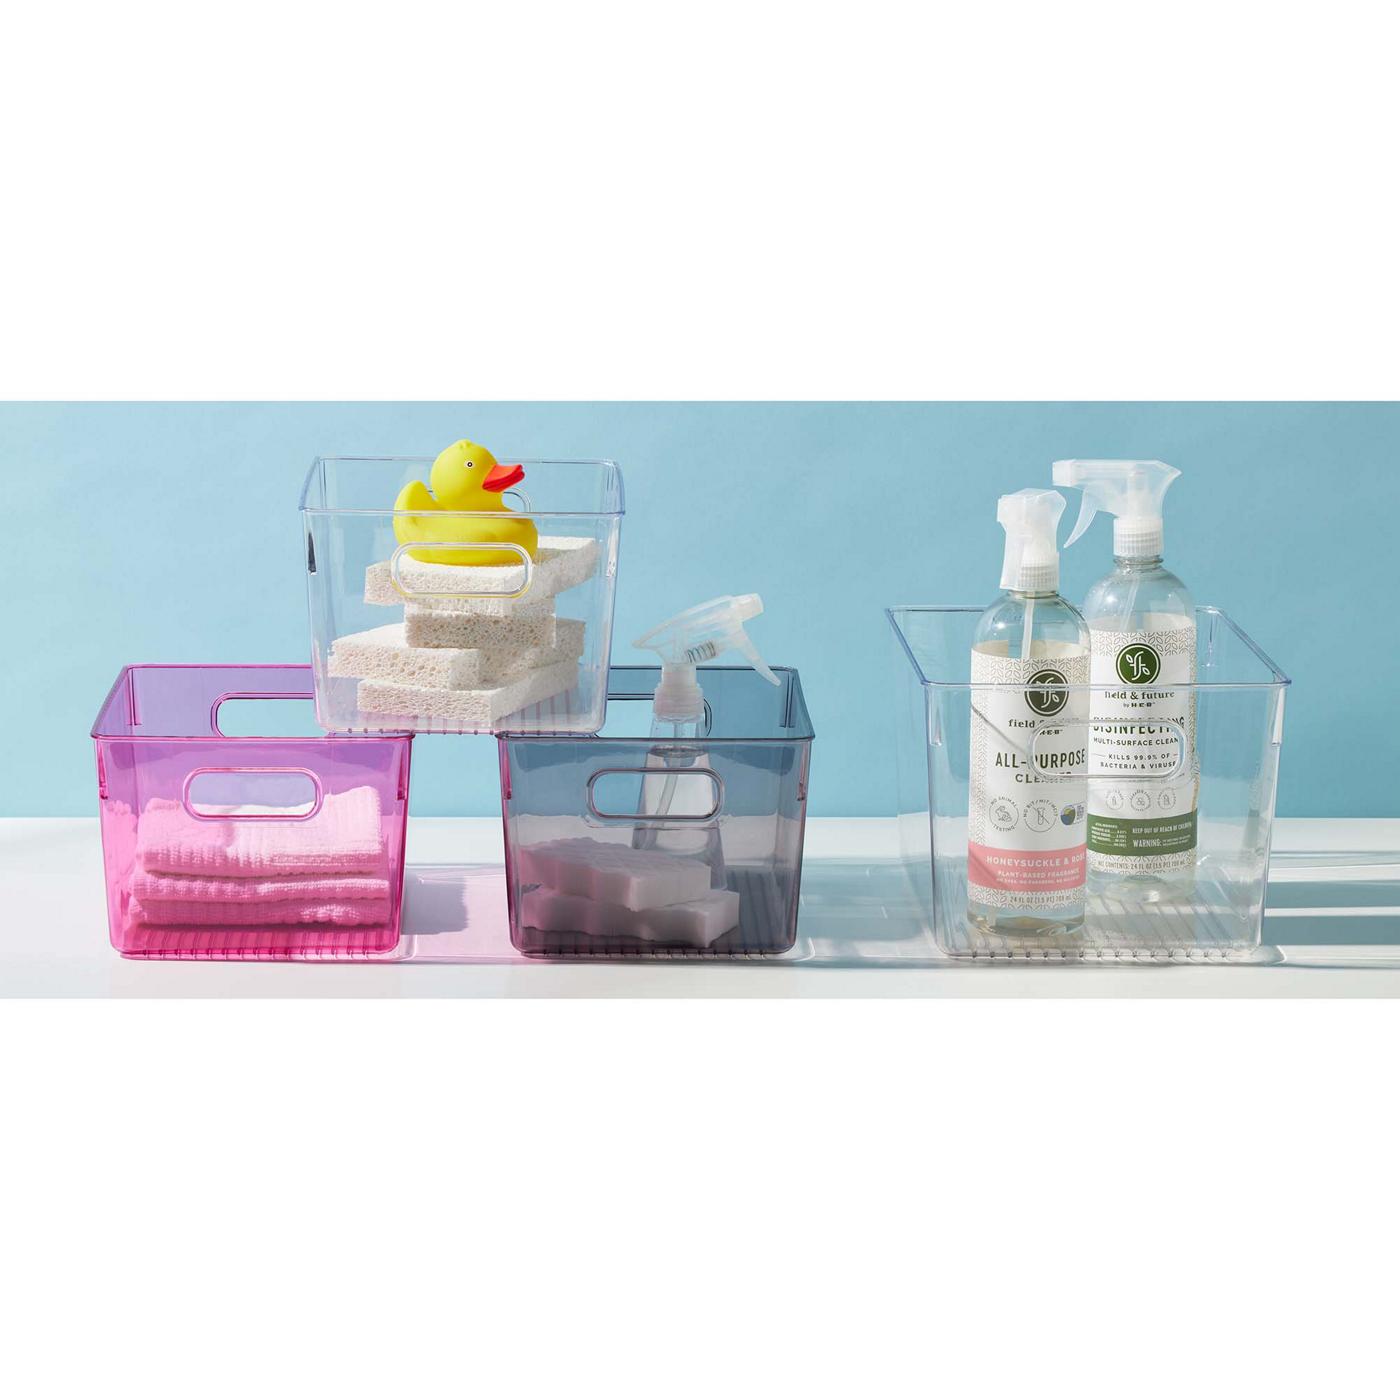 our goods Rectangle Storage Bin - Clear; image 2 of 2